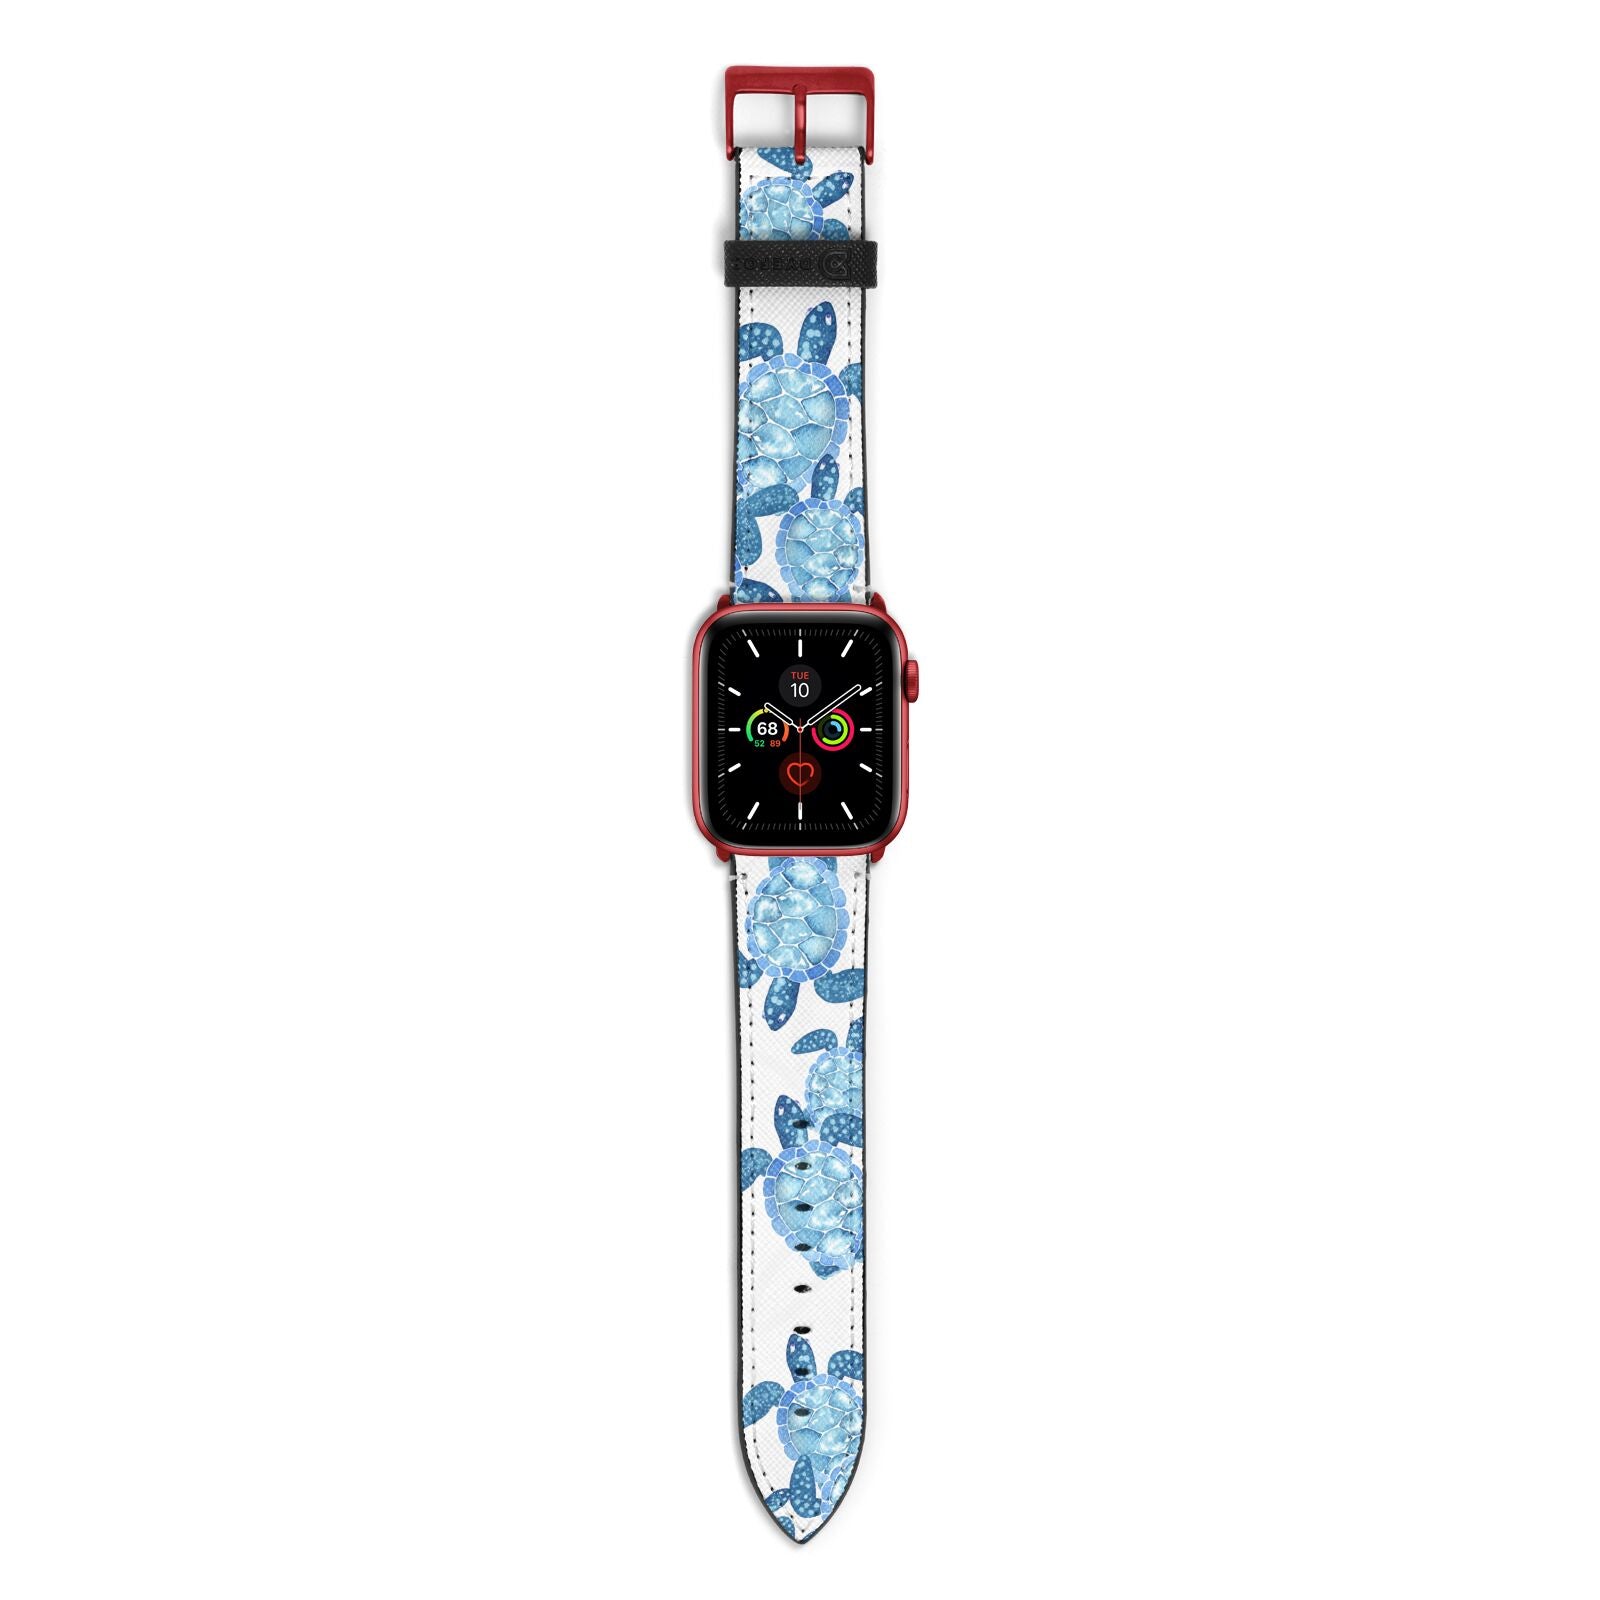 Turtle Apple Watch Strap with Red Hardware